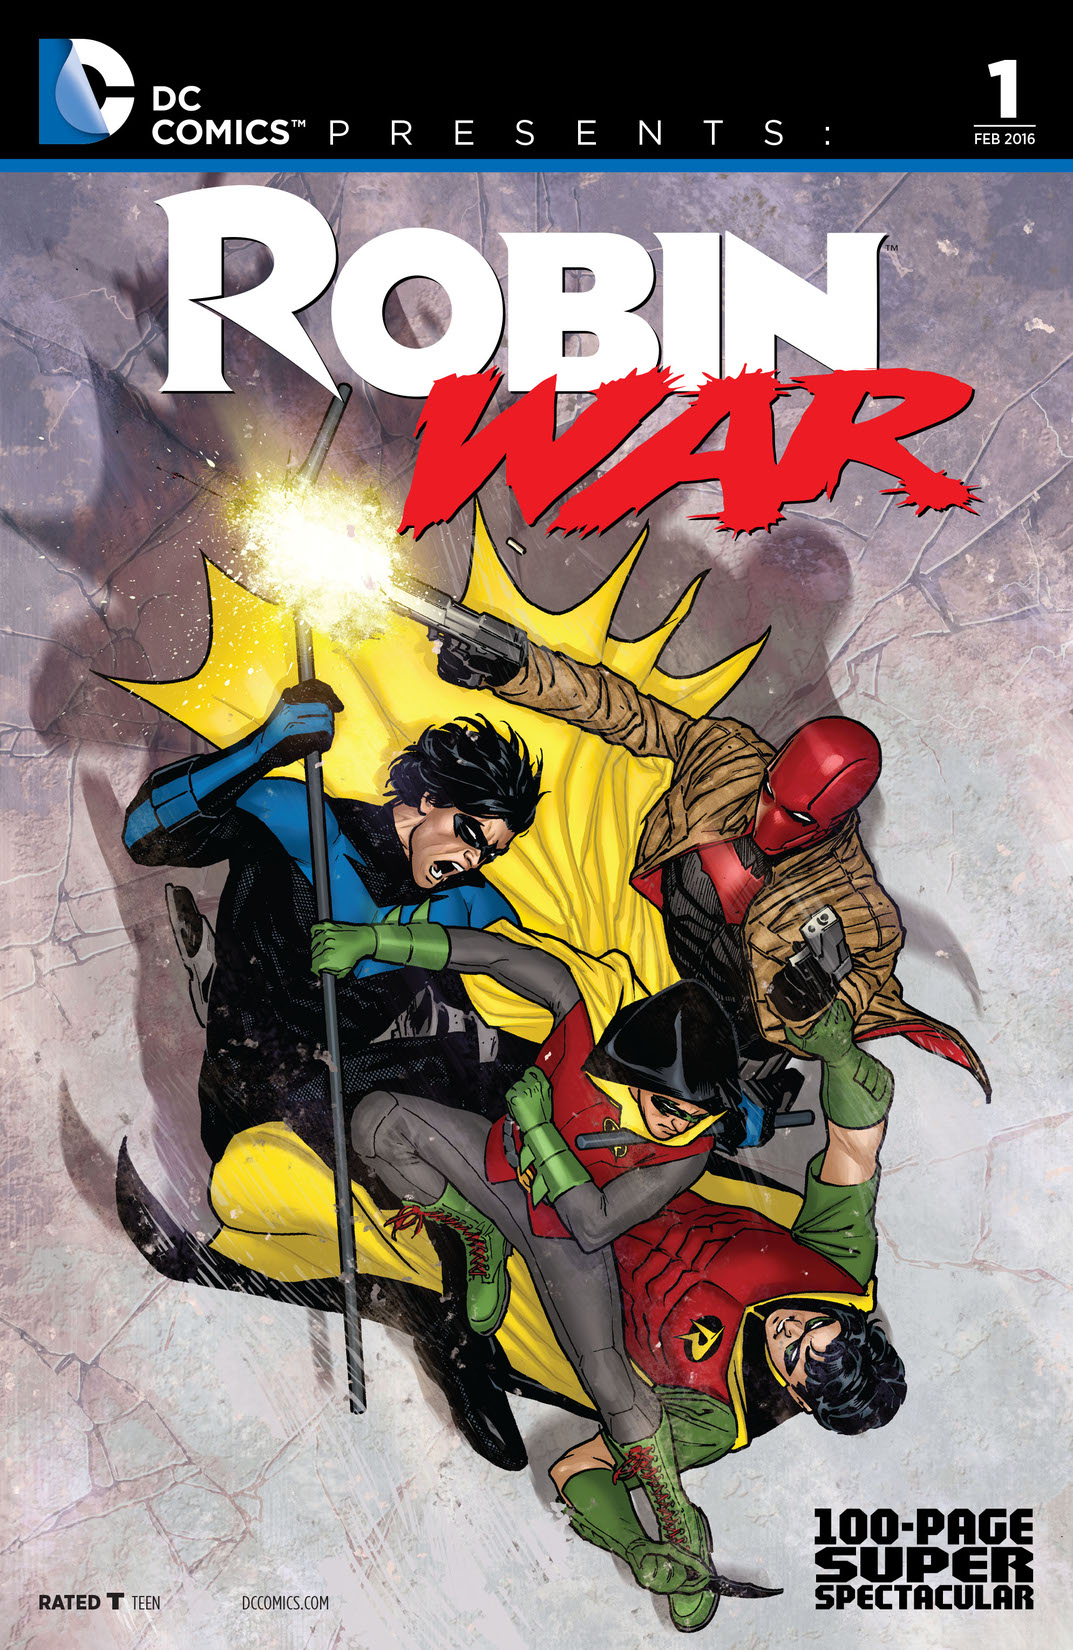 DC Comics Presents: Robin War 100-Page Spectacular (2015-) #1 preview images